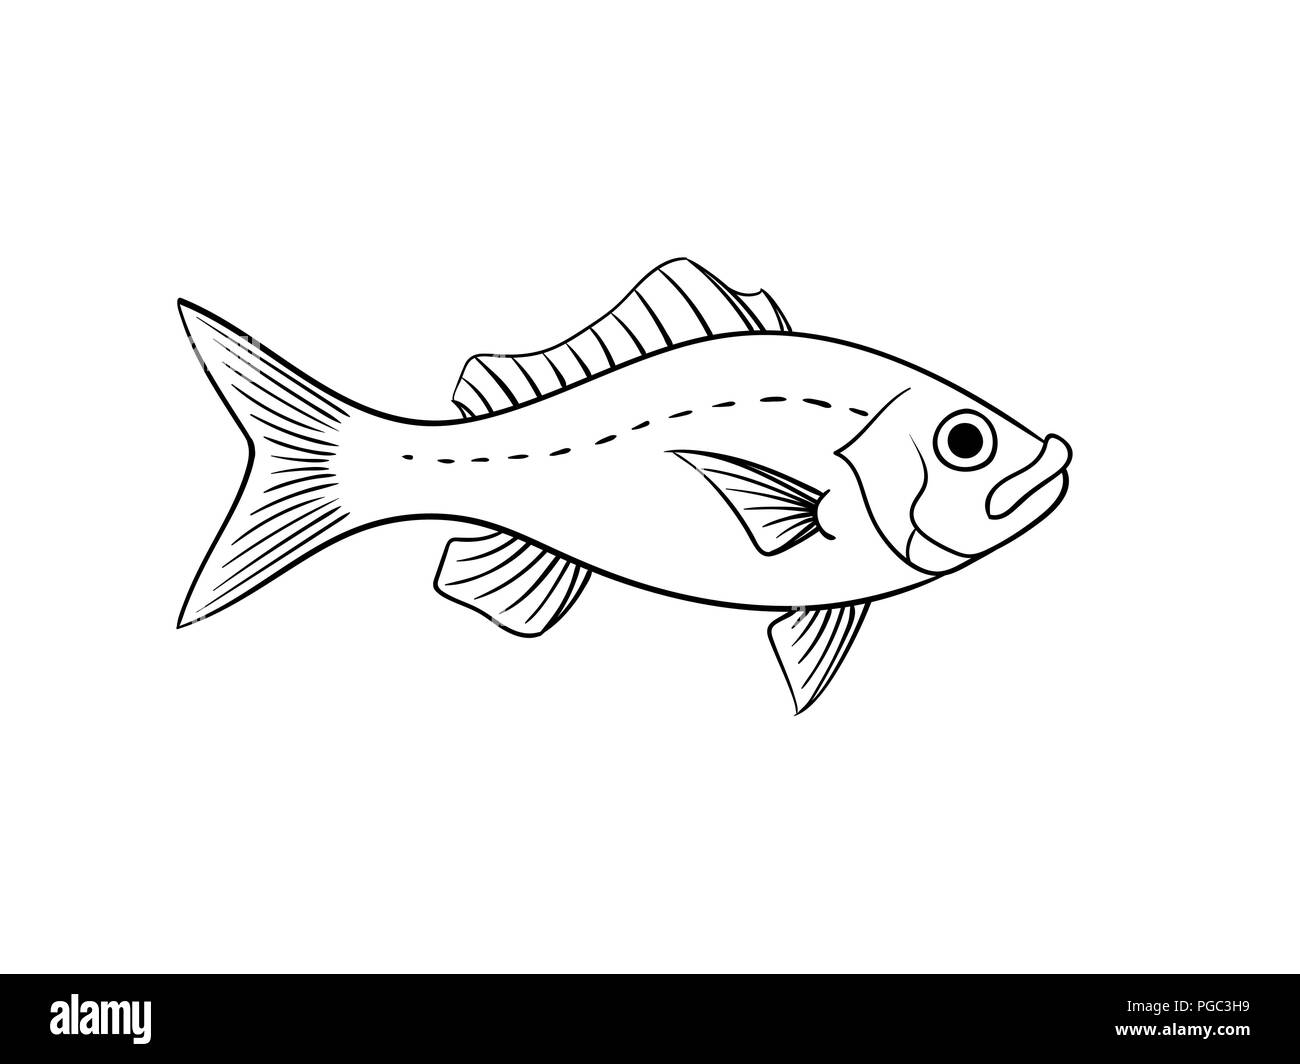 Red snapper fish illustration in vintage naturalistic style vector animal isolated on white Stock Vector